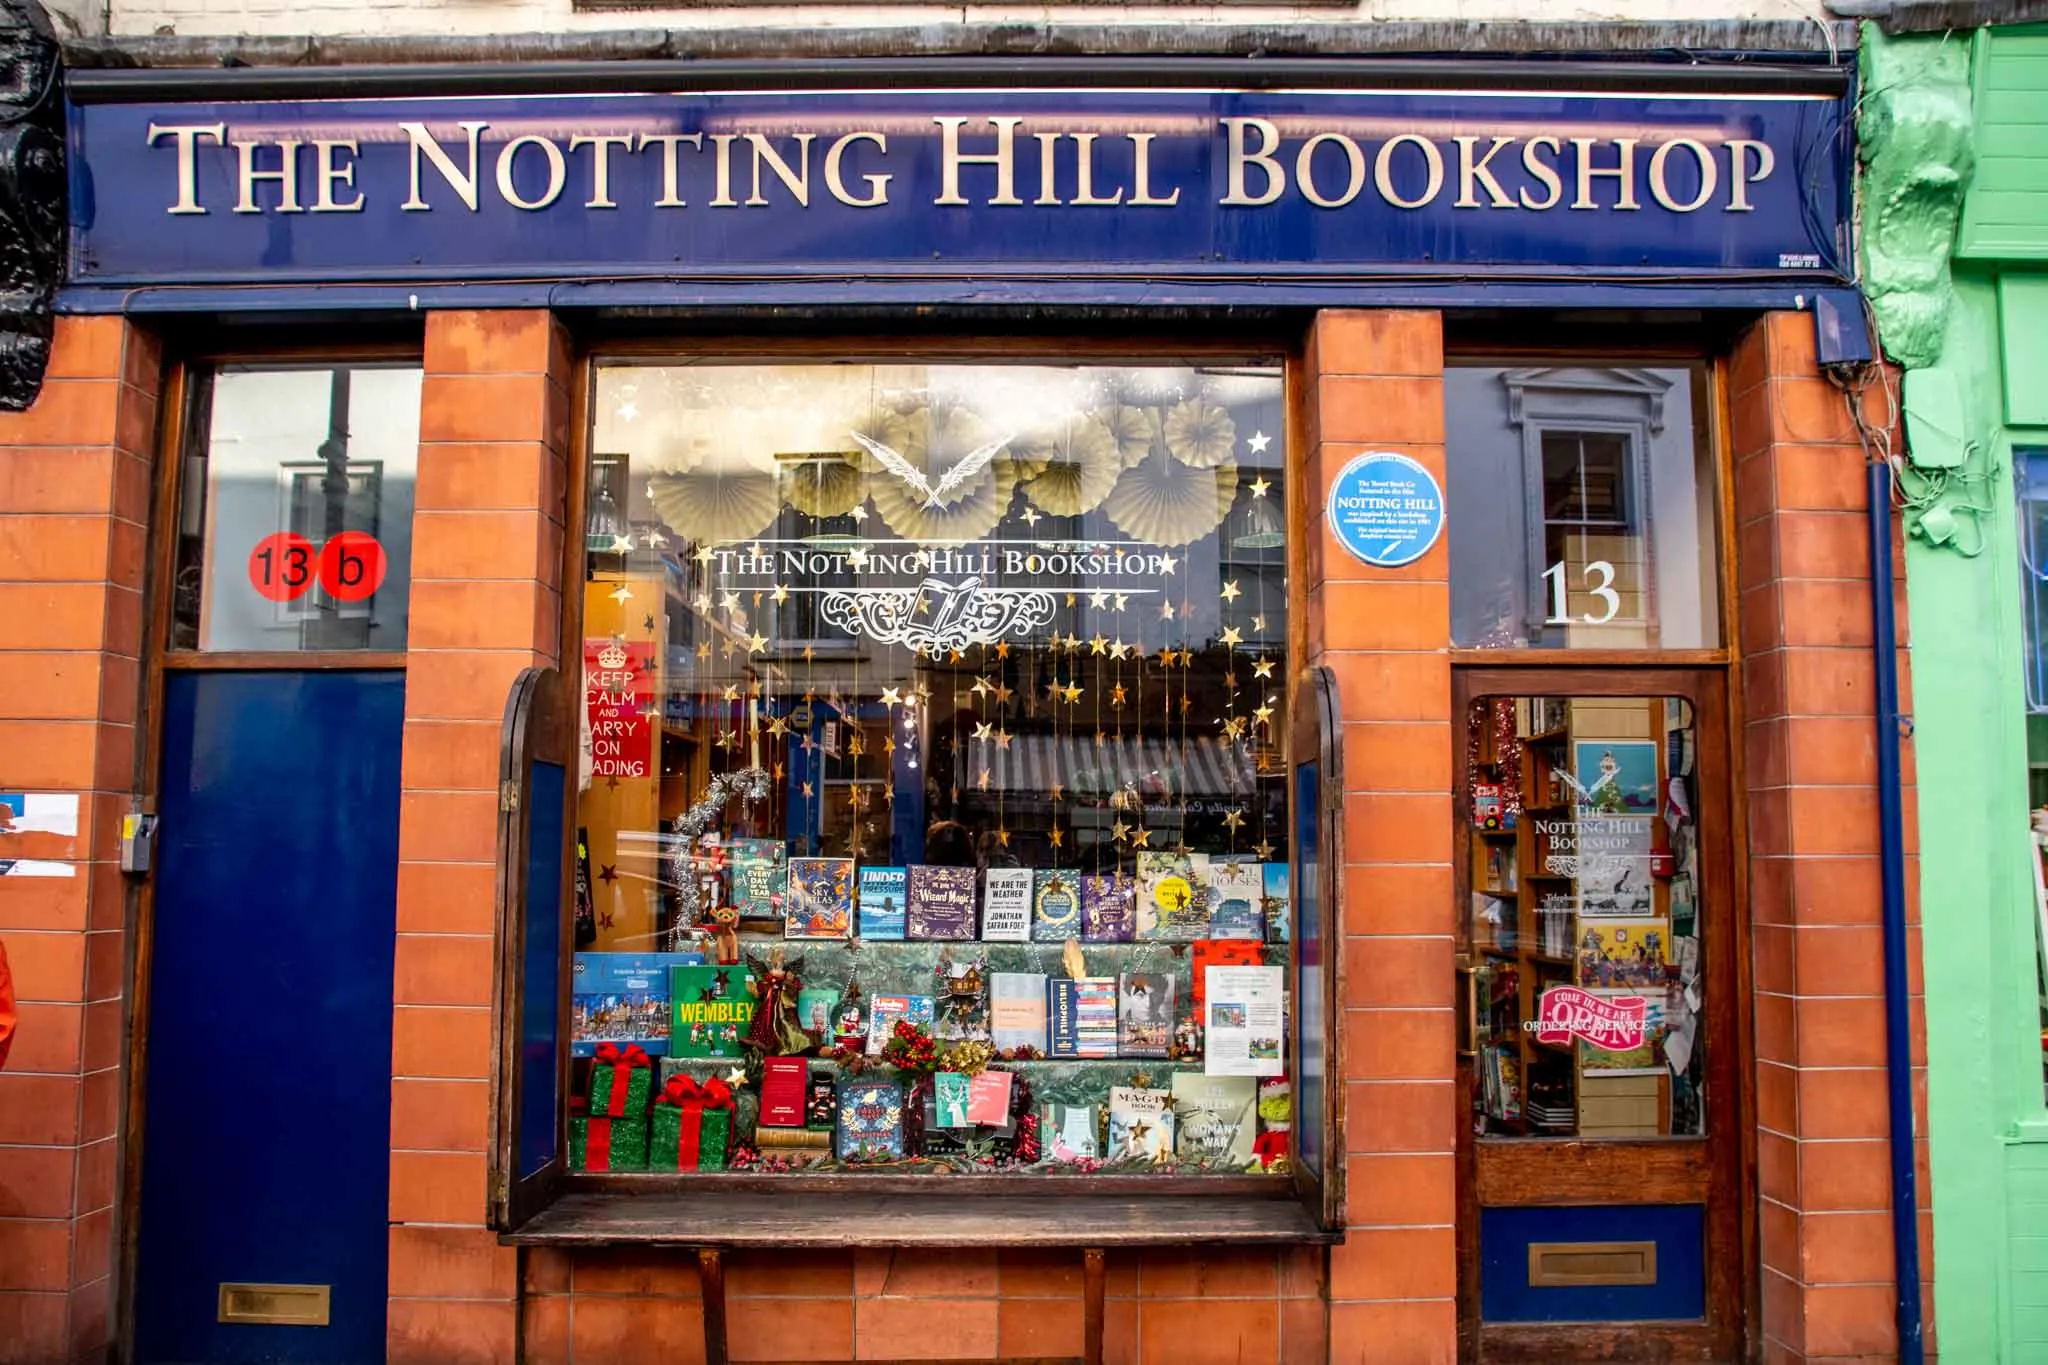 Brick exterior of Notting Hill Bookshop with a blue sign